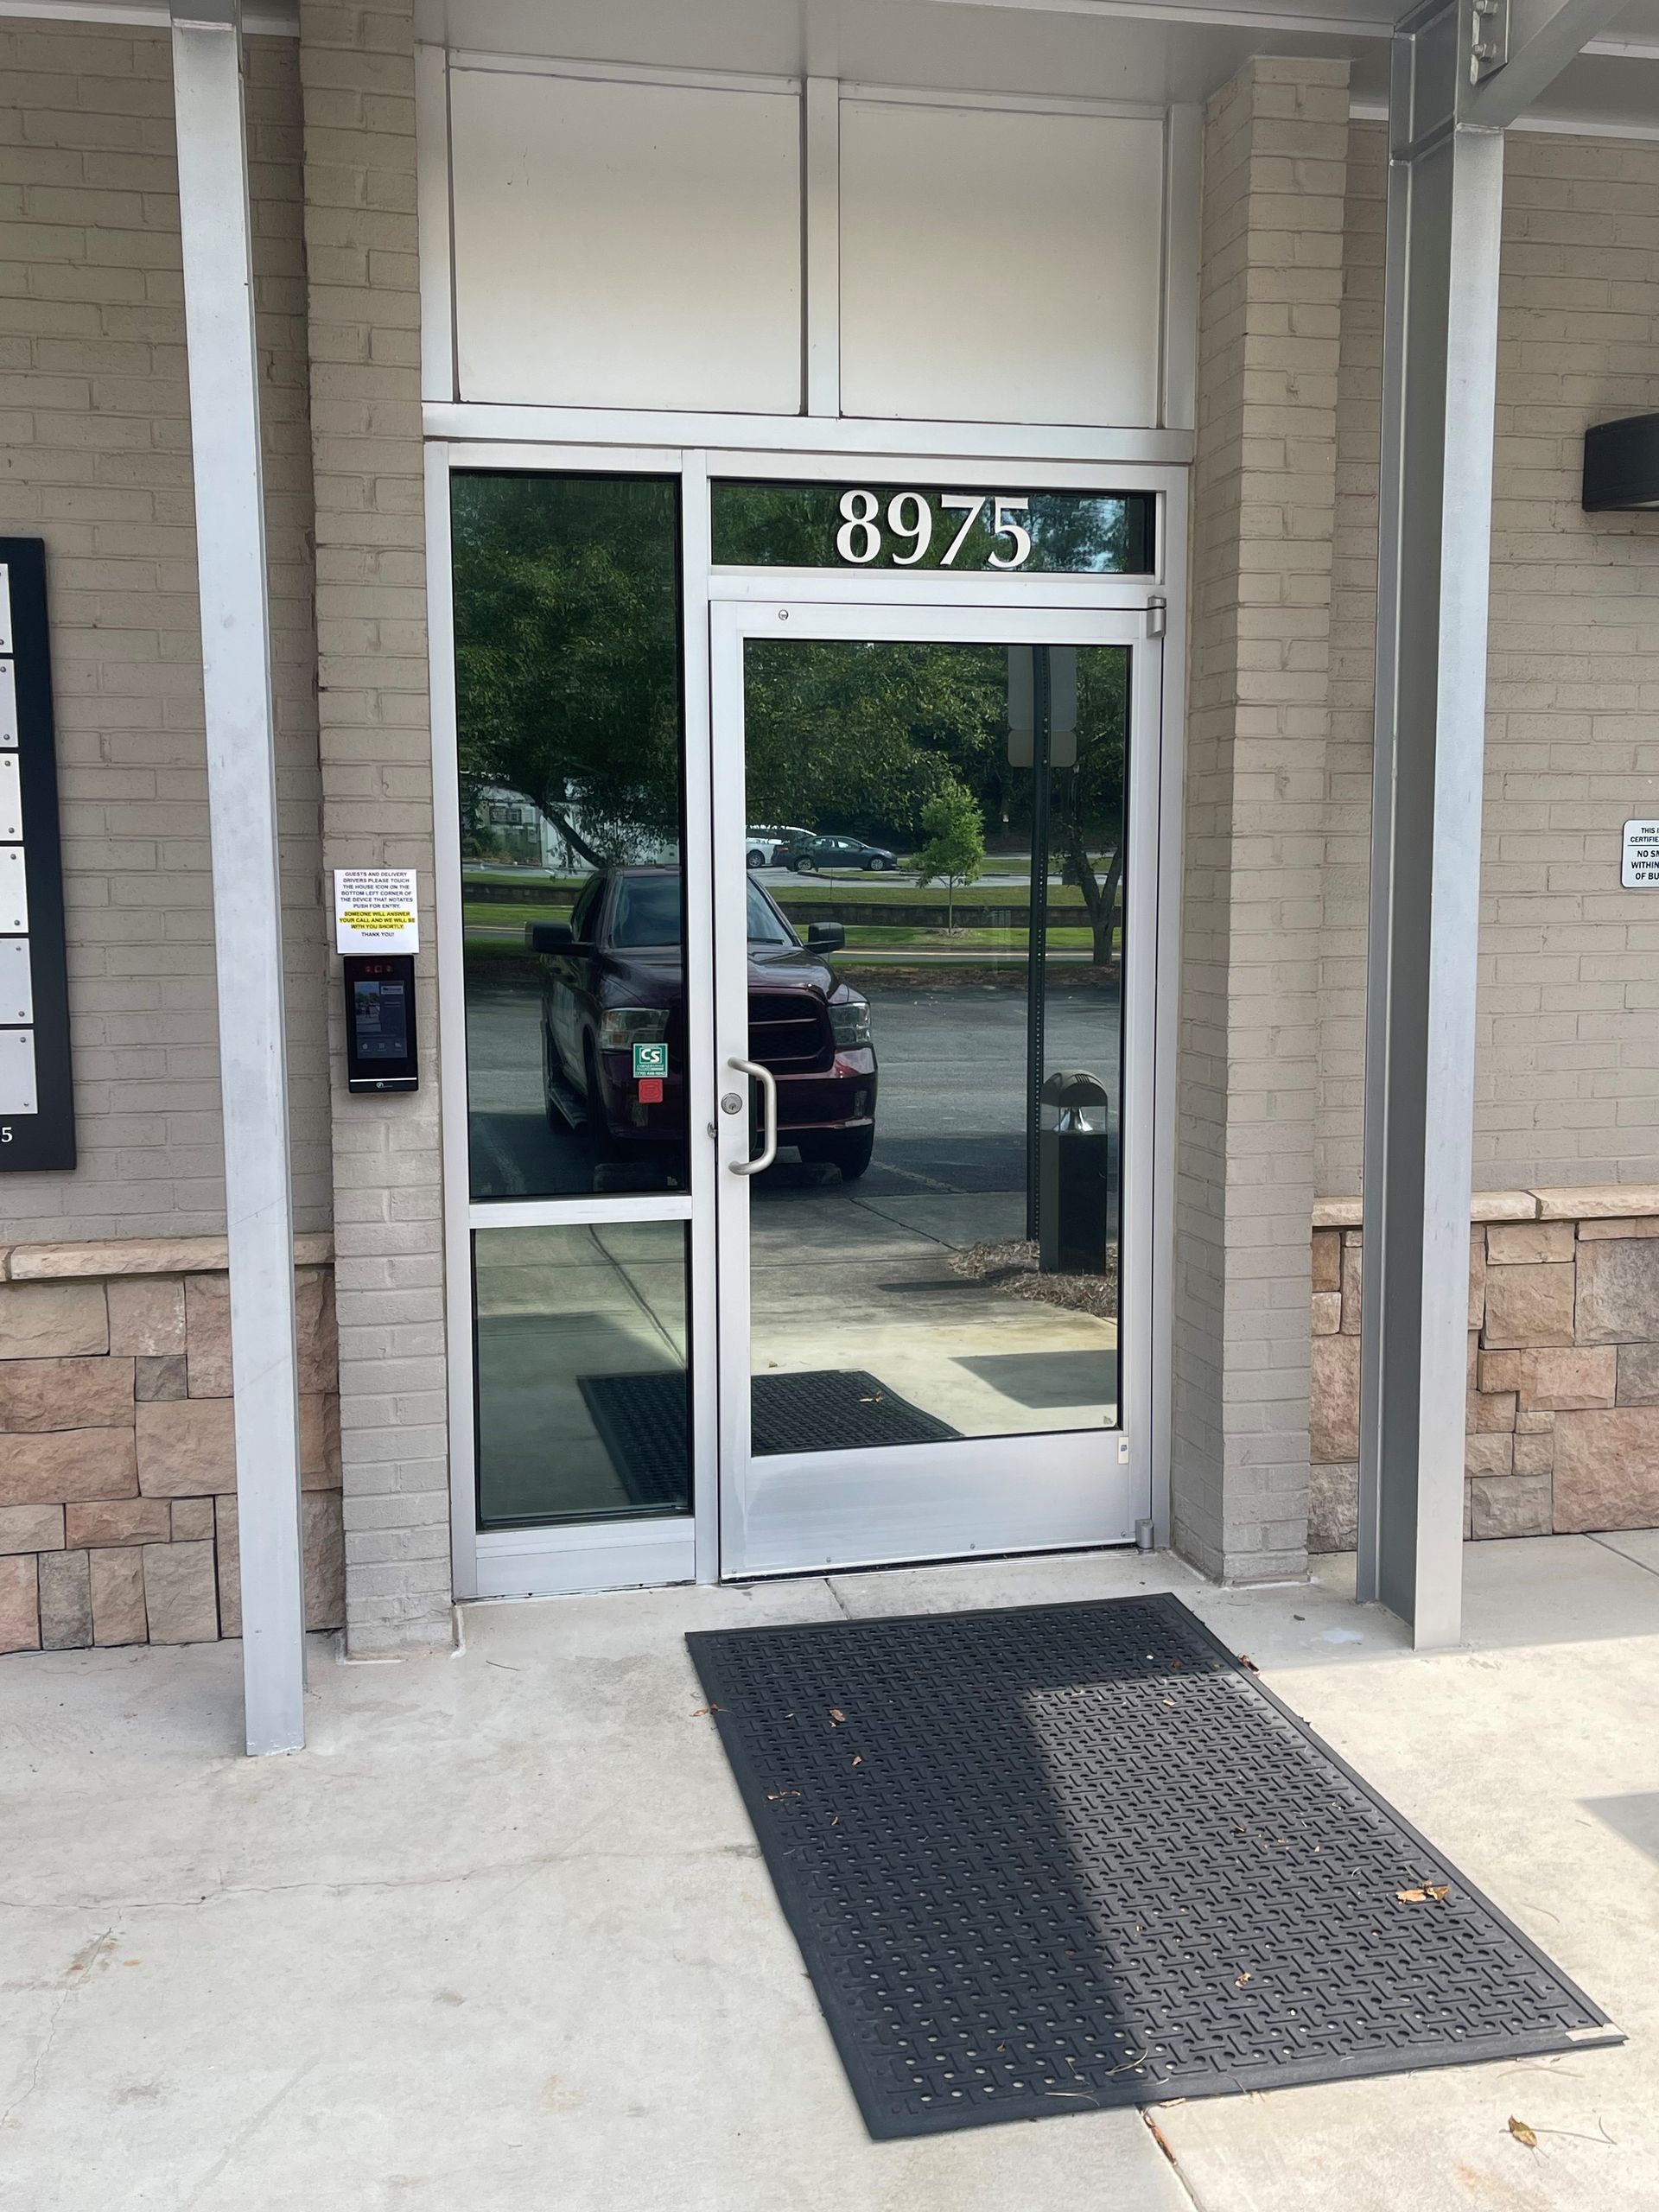 Door With The Number 8975 After - Lithia Springs, GA - Tint Life Window Tinting Wraps & PPF